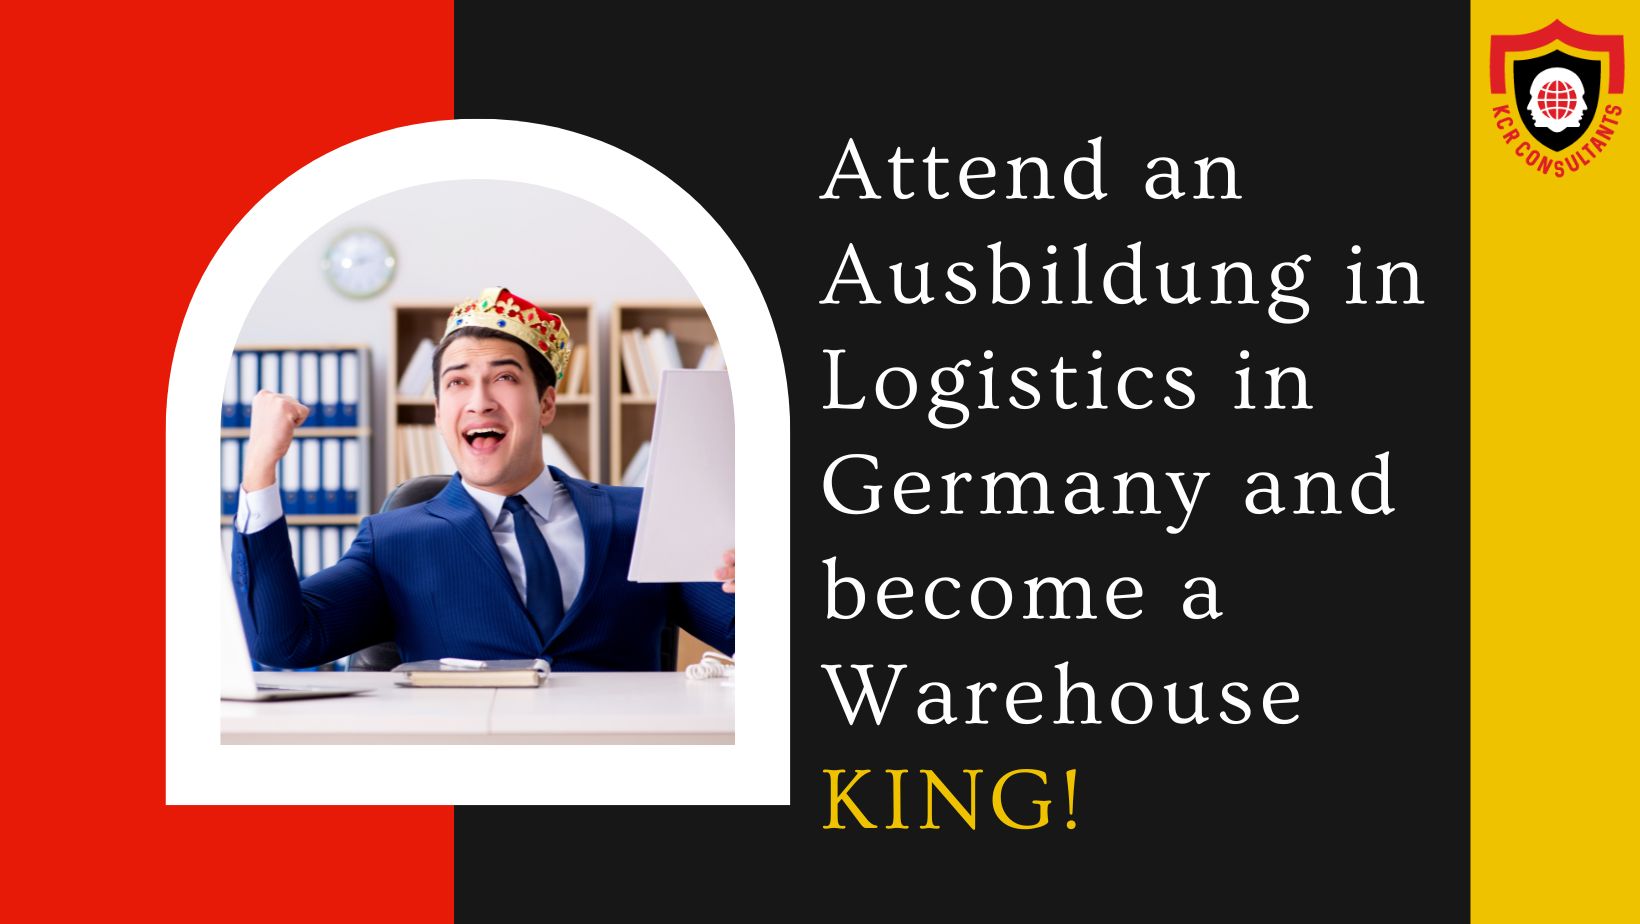 Warehousing jobs of logistic specialists after Ausbildung in Germany